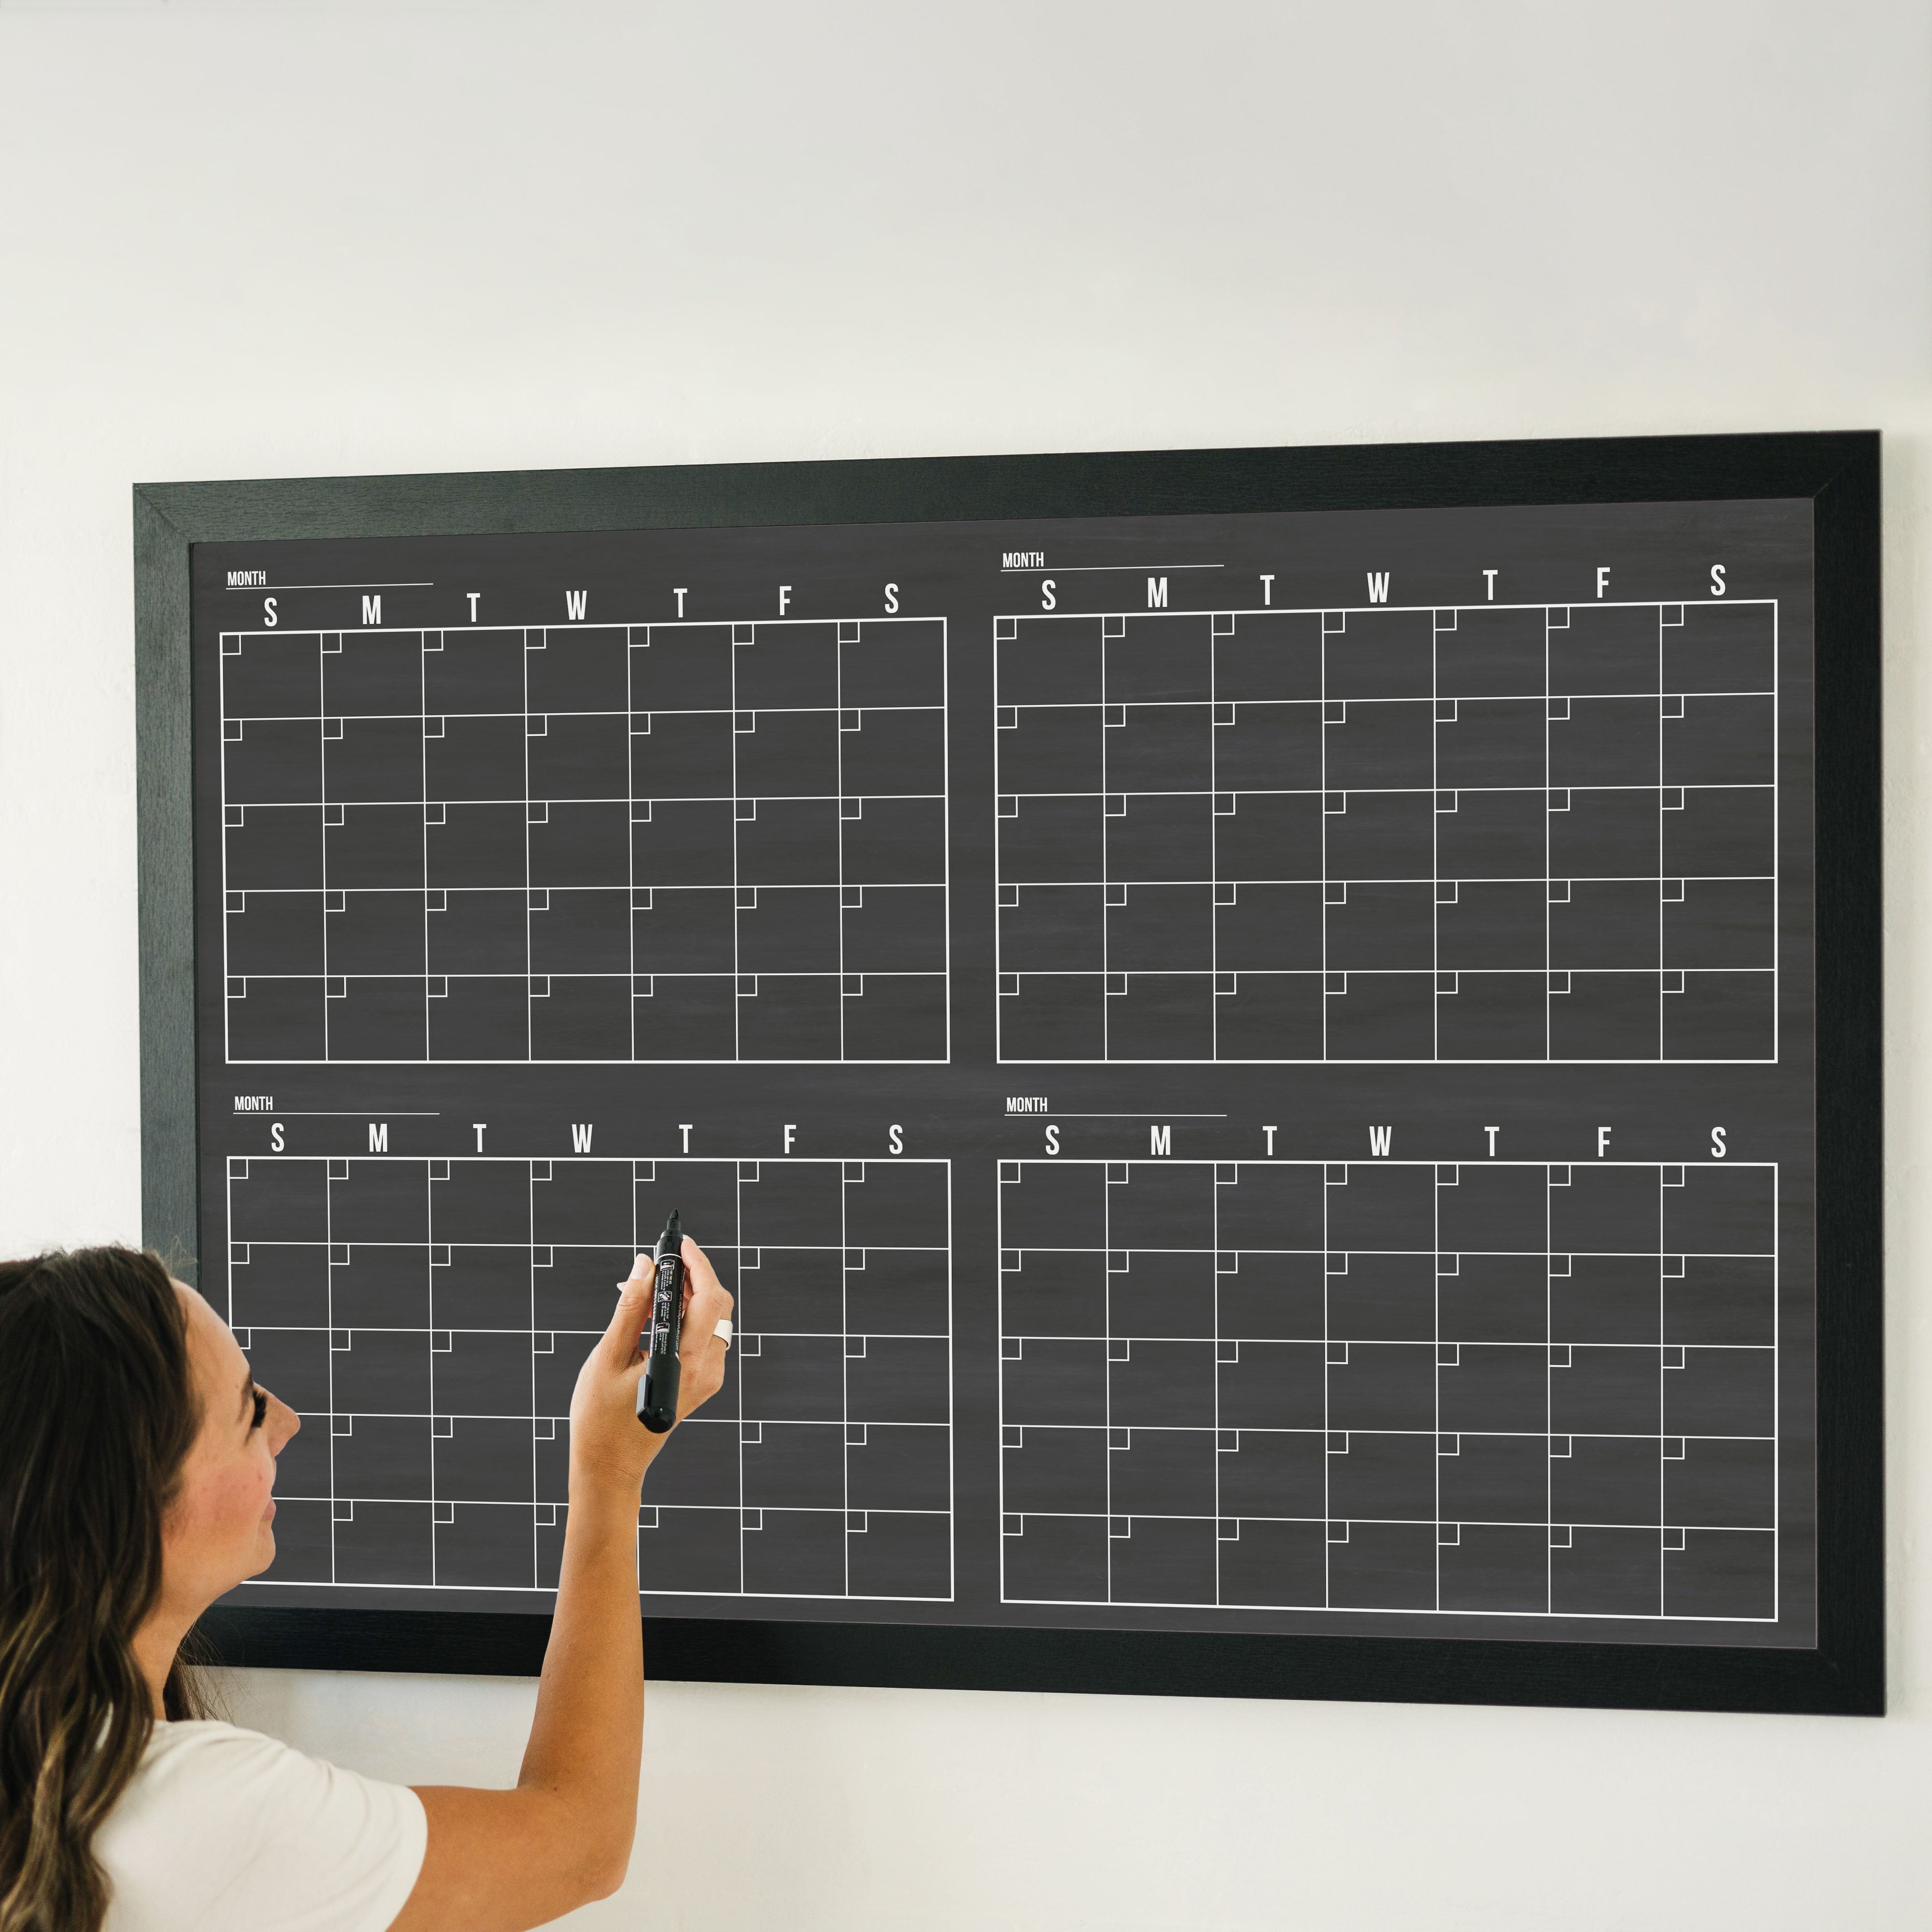 A framed dry-erase four month calendar with a chalkboard look hanging on the wall